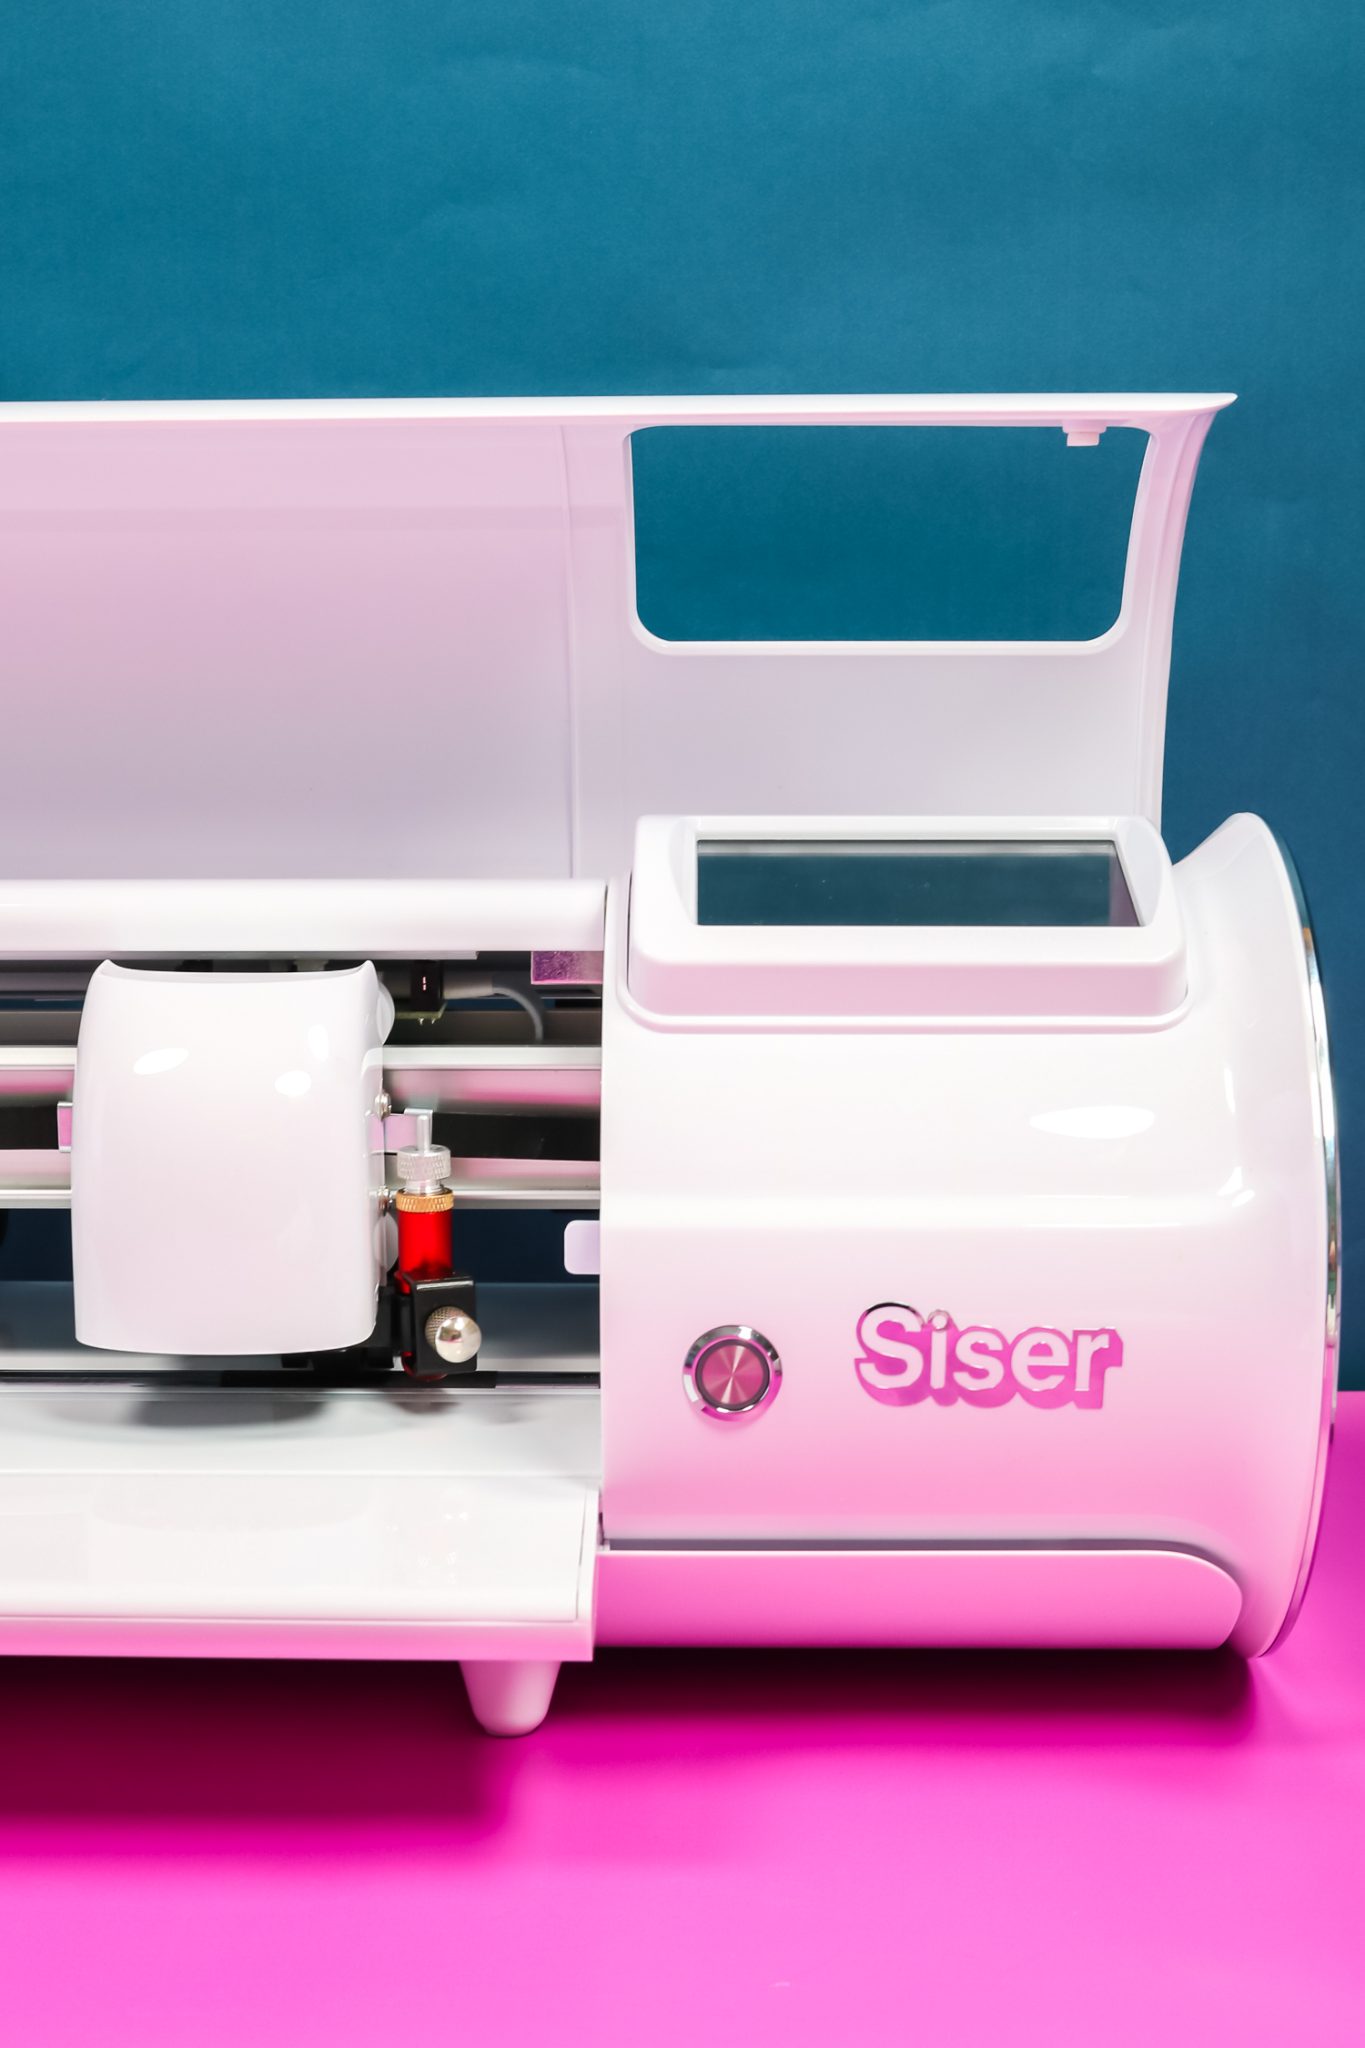 What is a Cricut Machine? (+27 Projects You Can Do with One!)